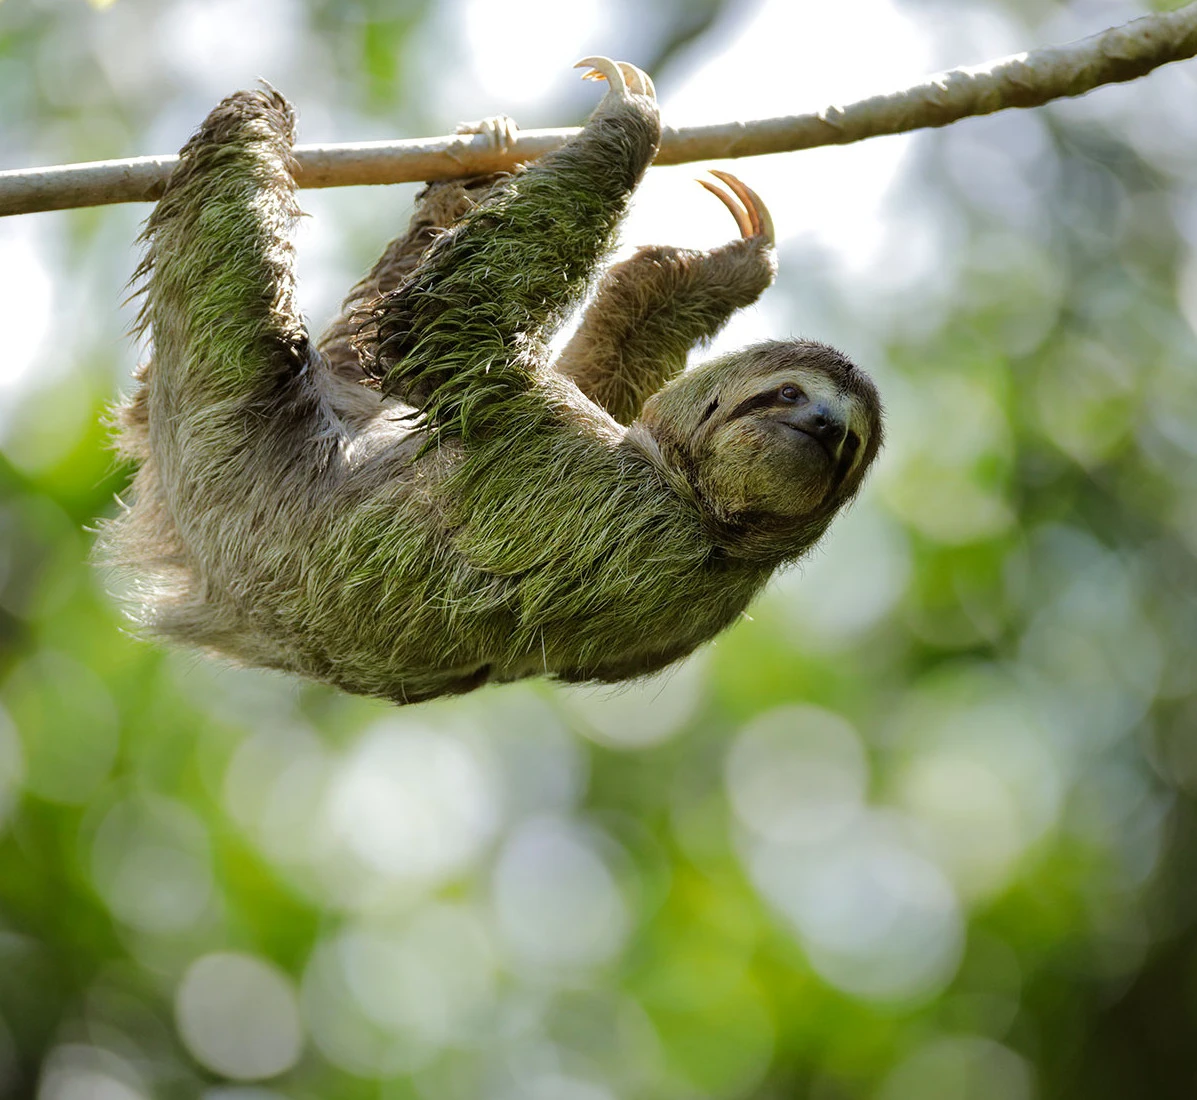 Sloth hanging from a branch in jungle